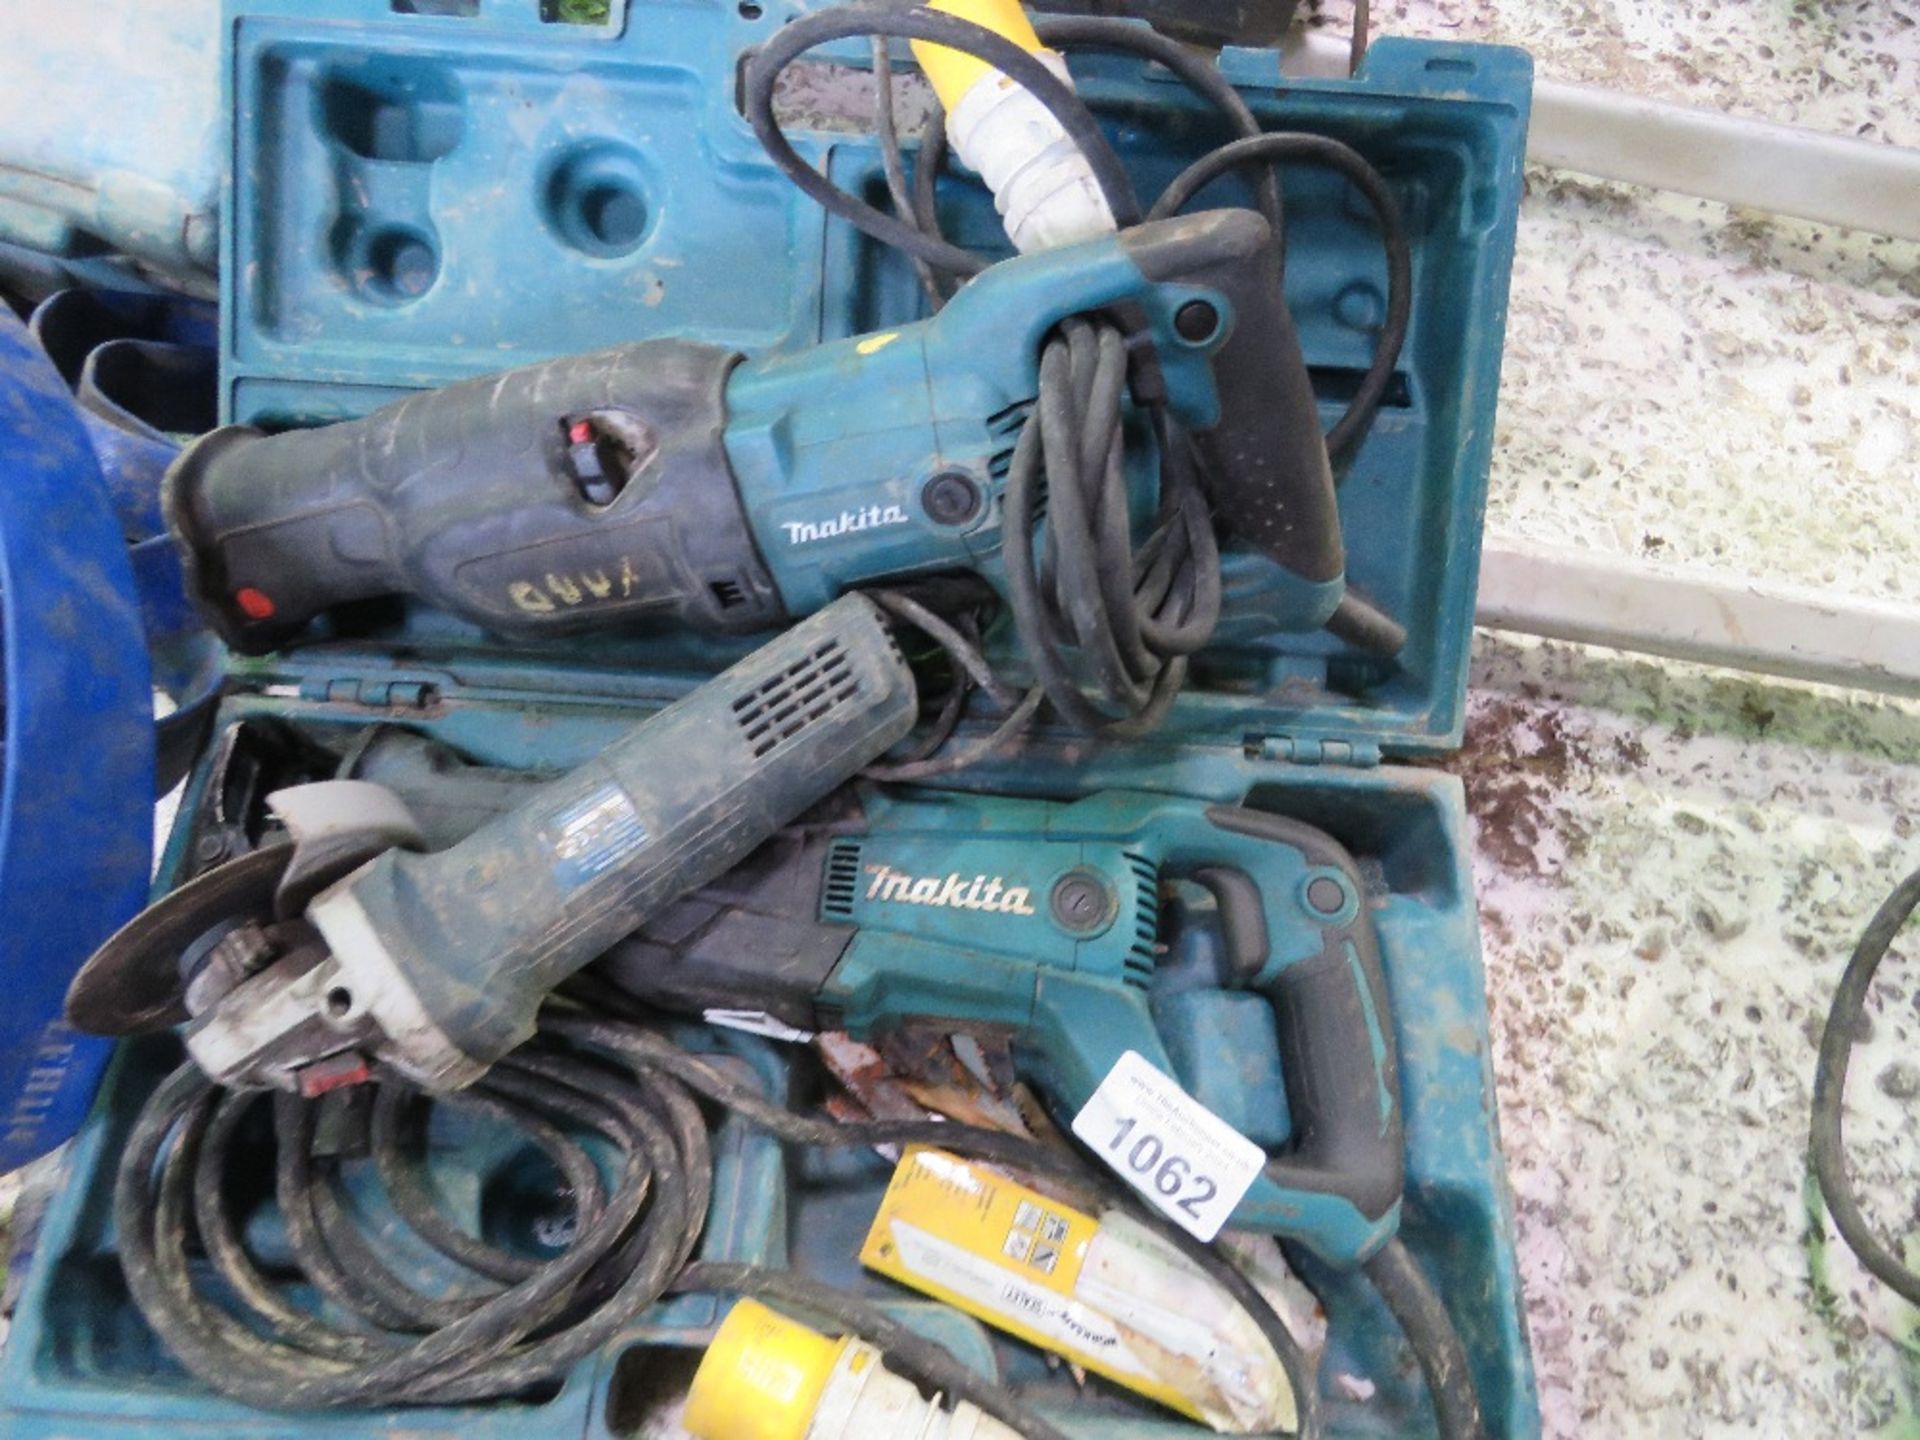 2 X MAKITA 110VOLT RECIPROCATING SAWS PLUS A GRINDER. SOURCED FROM COMPANY LIQUIDATION.